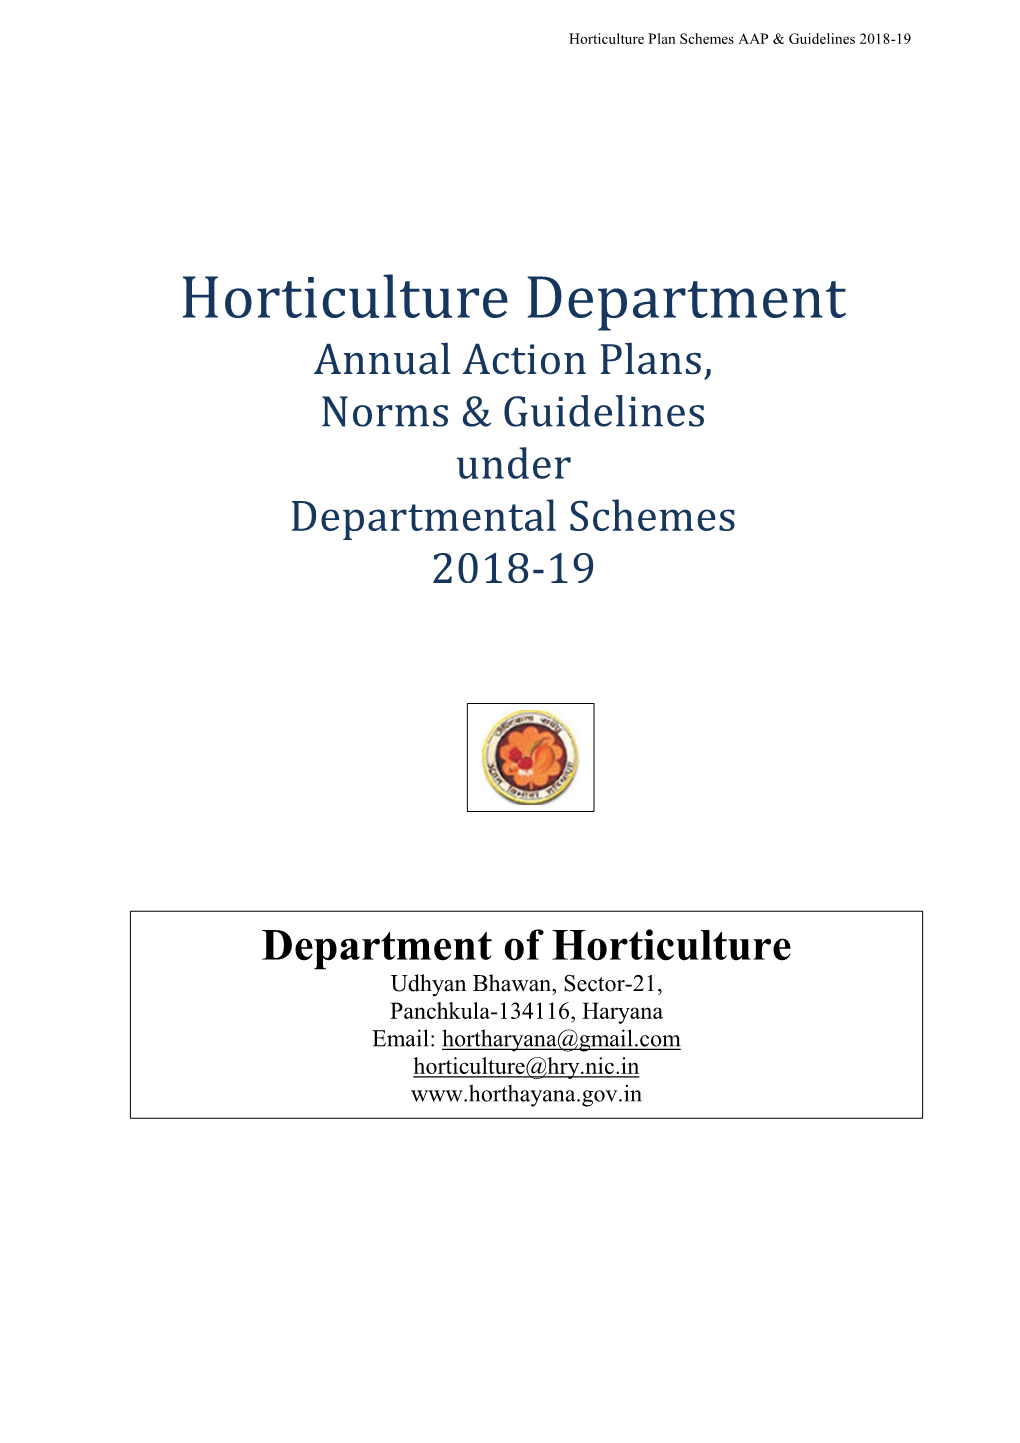 Annual Action Plans, Norms and Guidelines Under Departmental